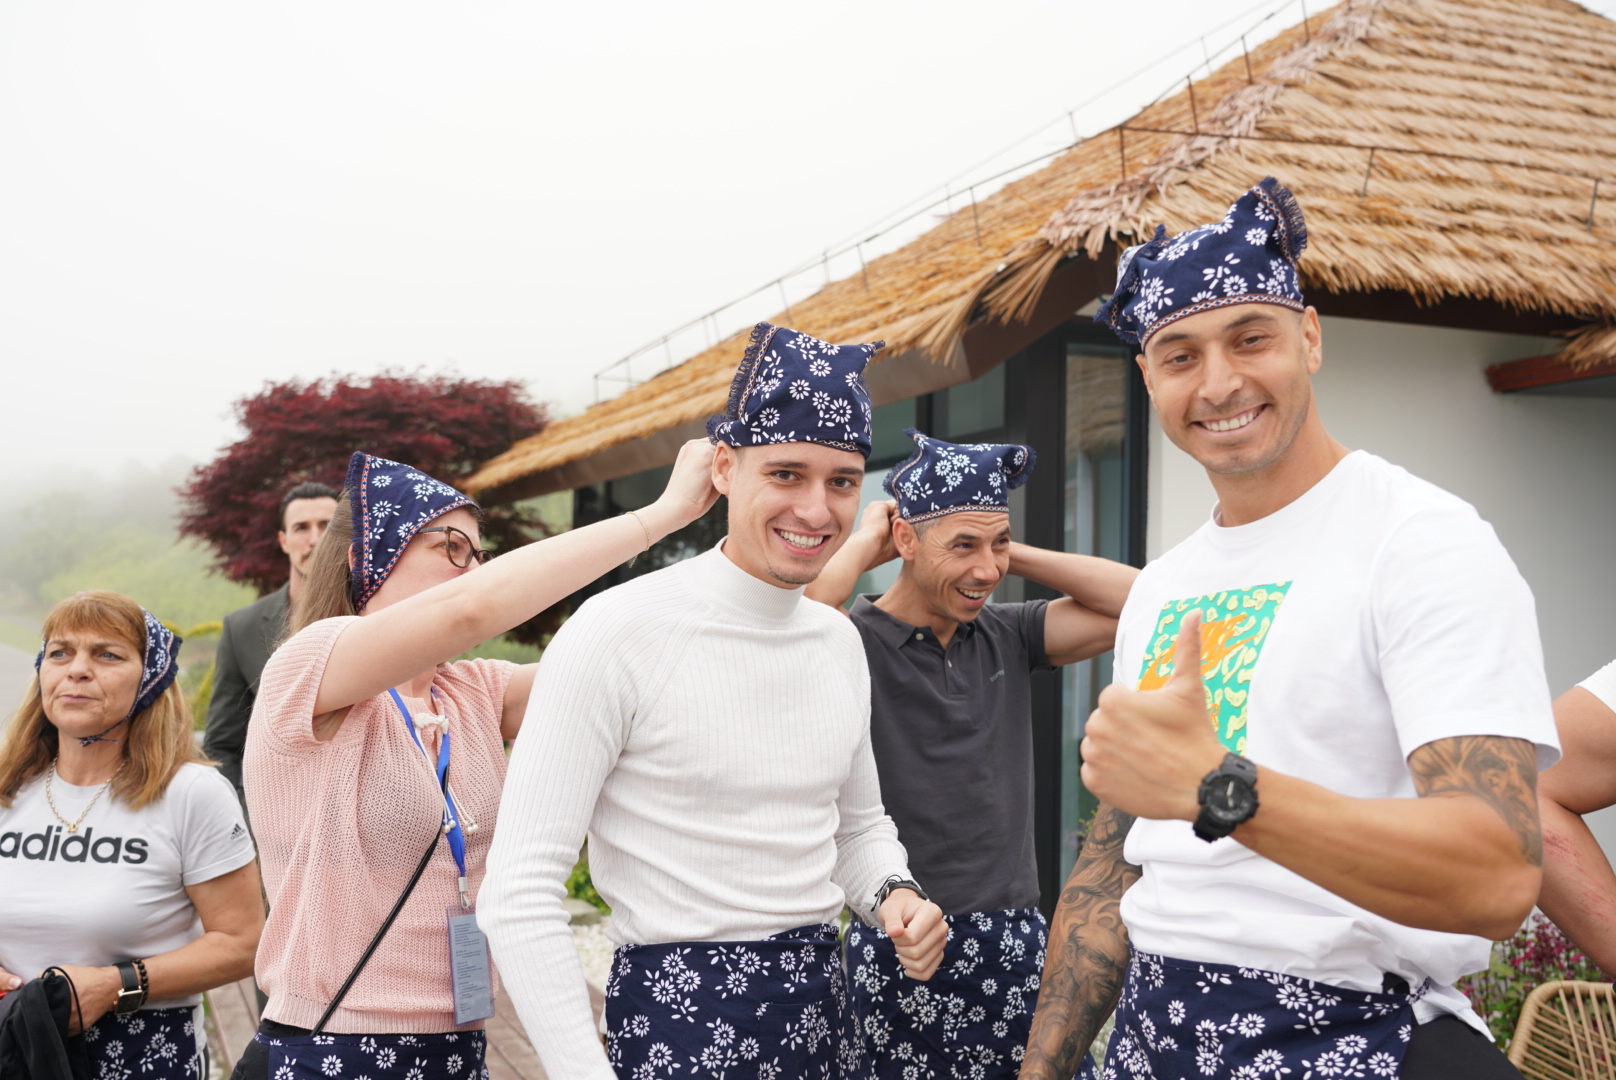 A group of Bulgarian visitors take part in a tea-picking and tasting activity at a tea garden near Dongqian Lake in Ningbo City, Zhejiang Province on May 20, 2024. /Photo provided to CGTN